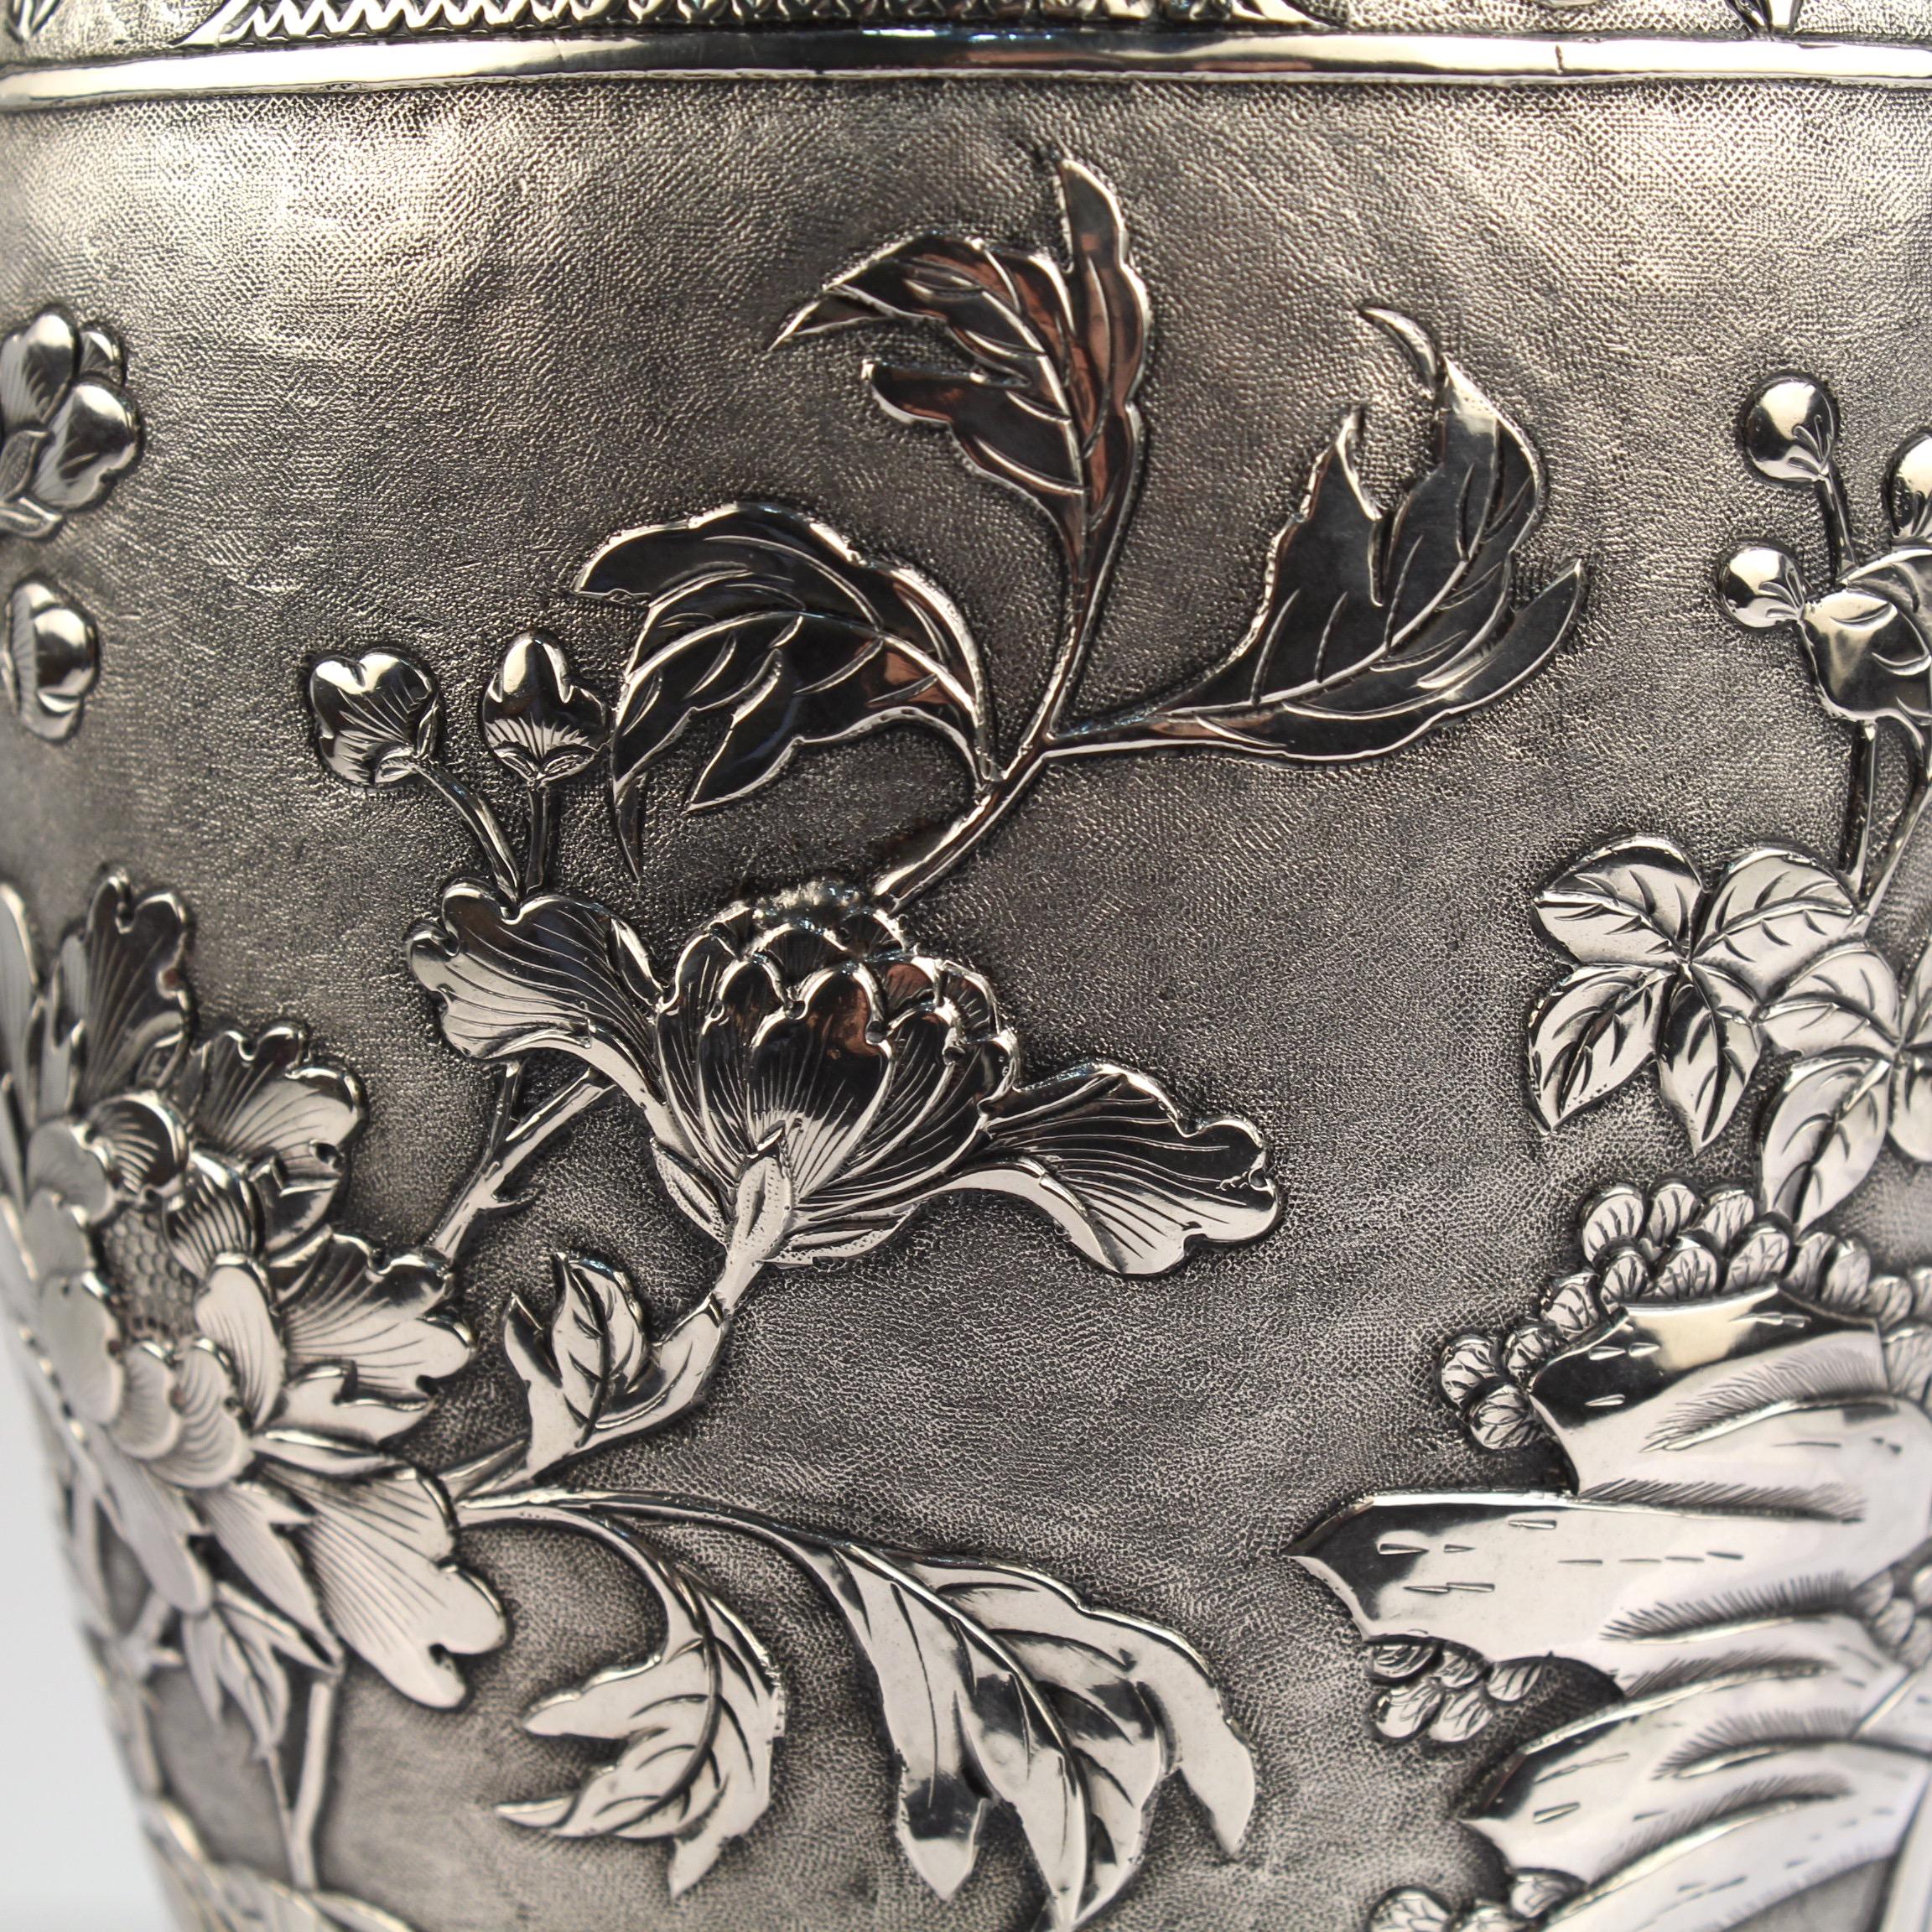 Antique Signed Chinese Export Sterling Silver Vase with Landscape and Figures For Sale 7